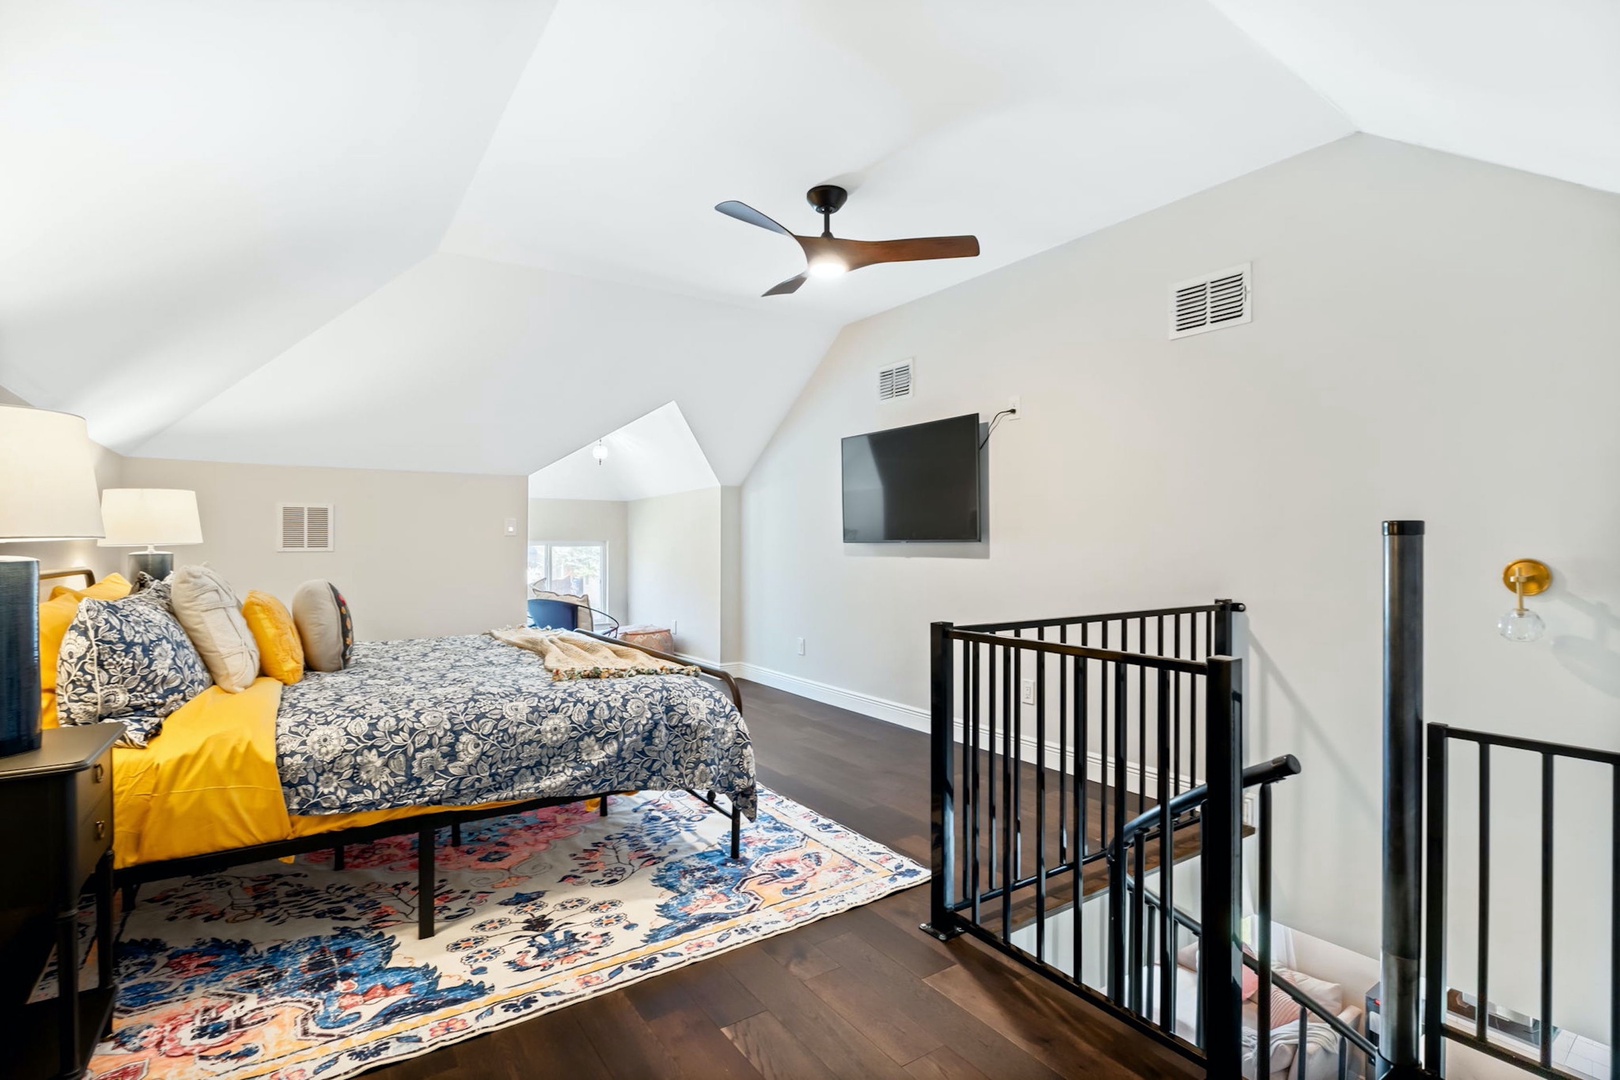 Enjoy the private space in the loft complete with king bed, TV & nook